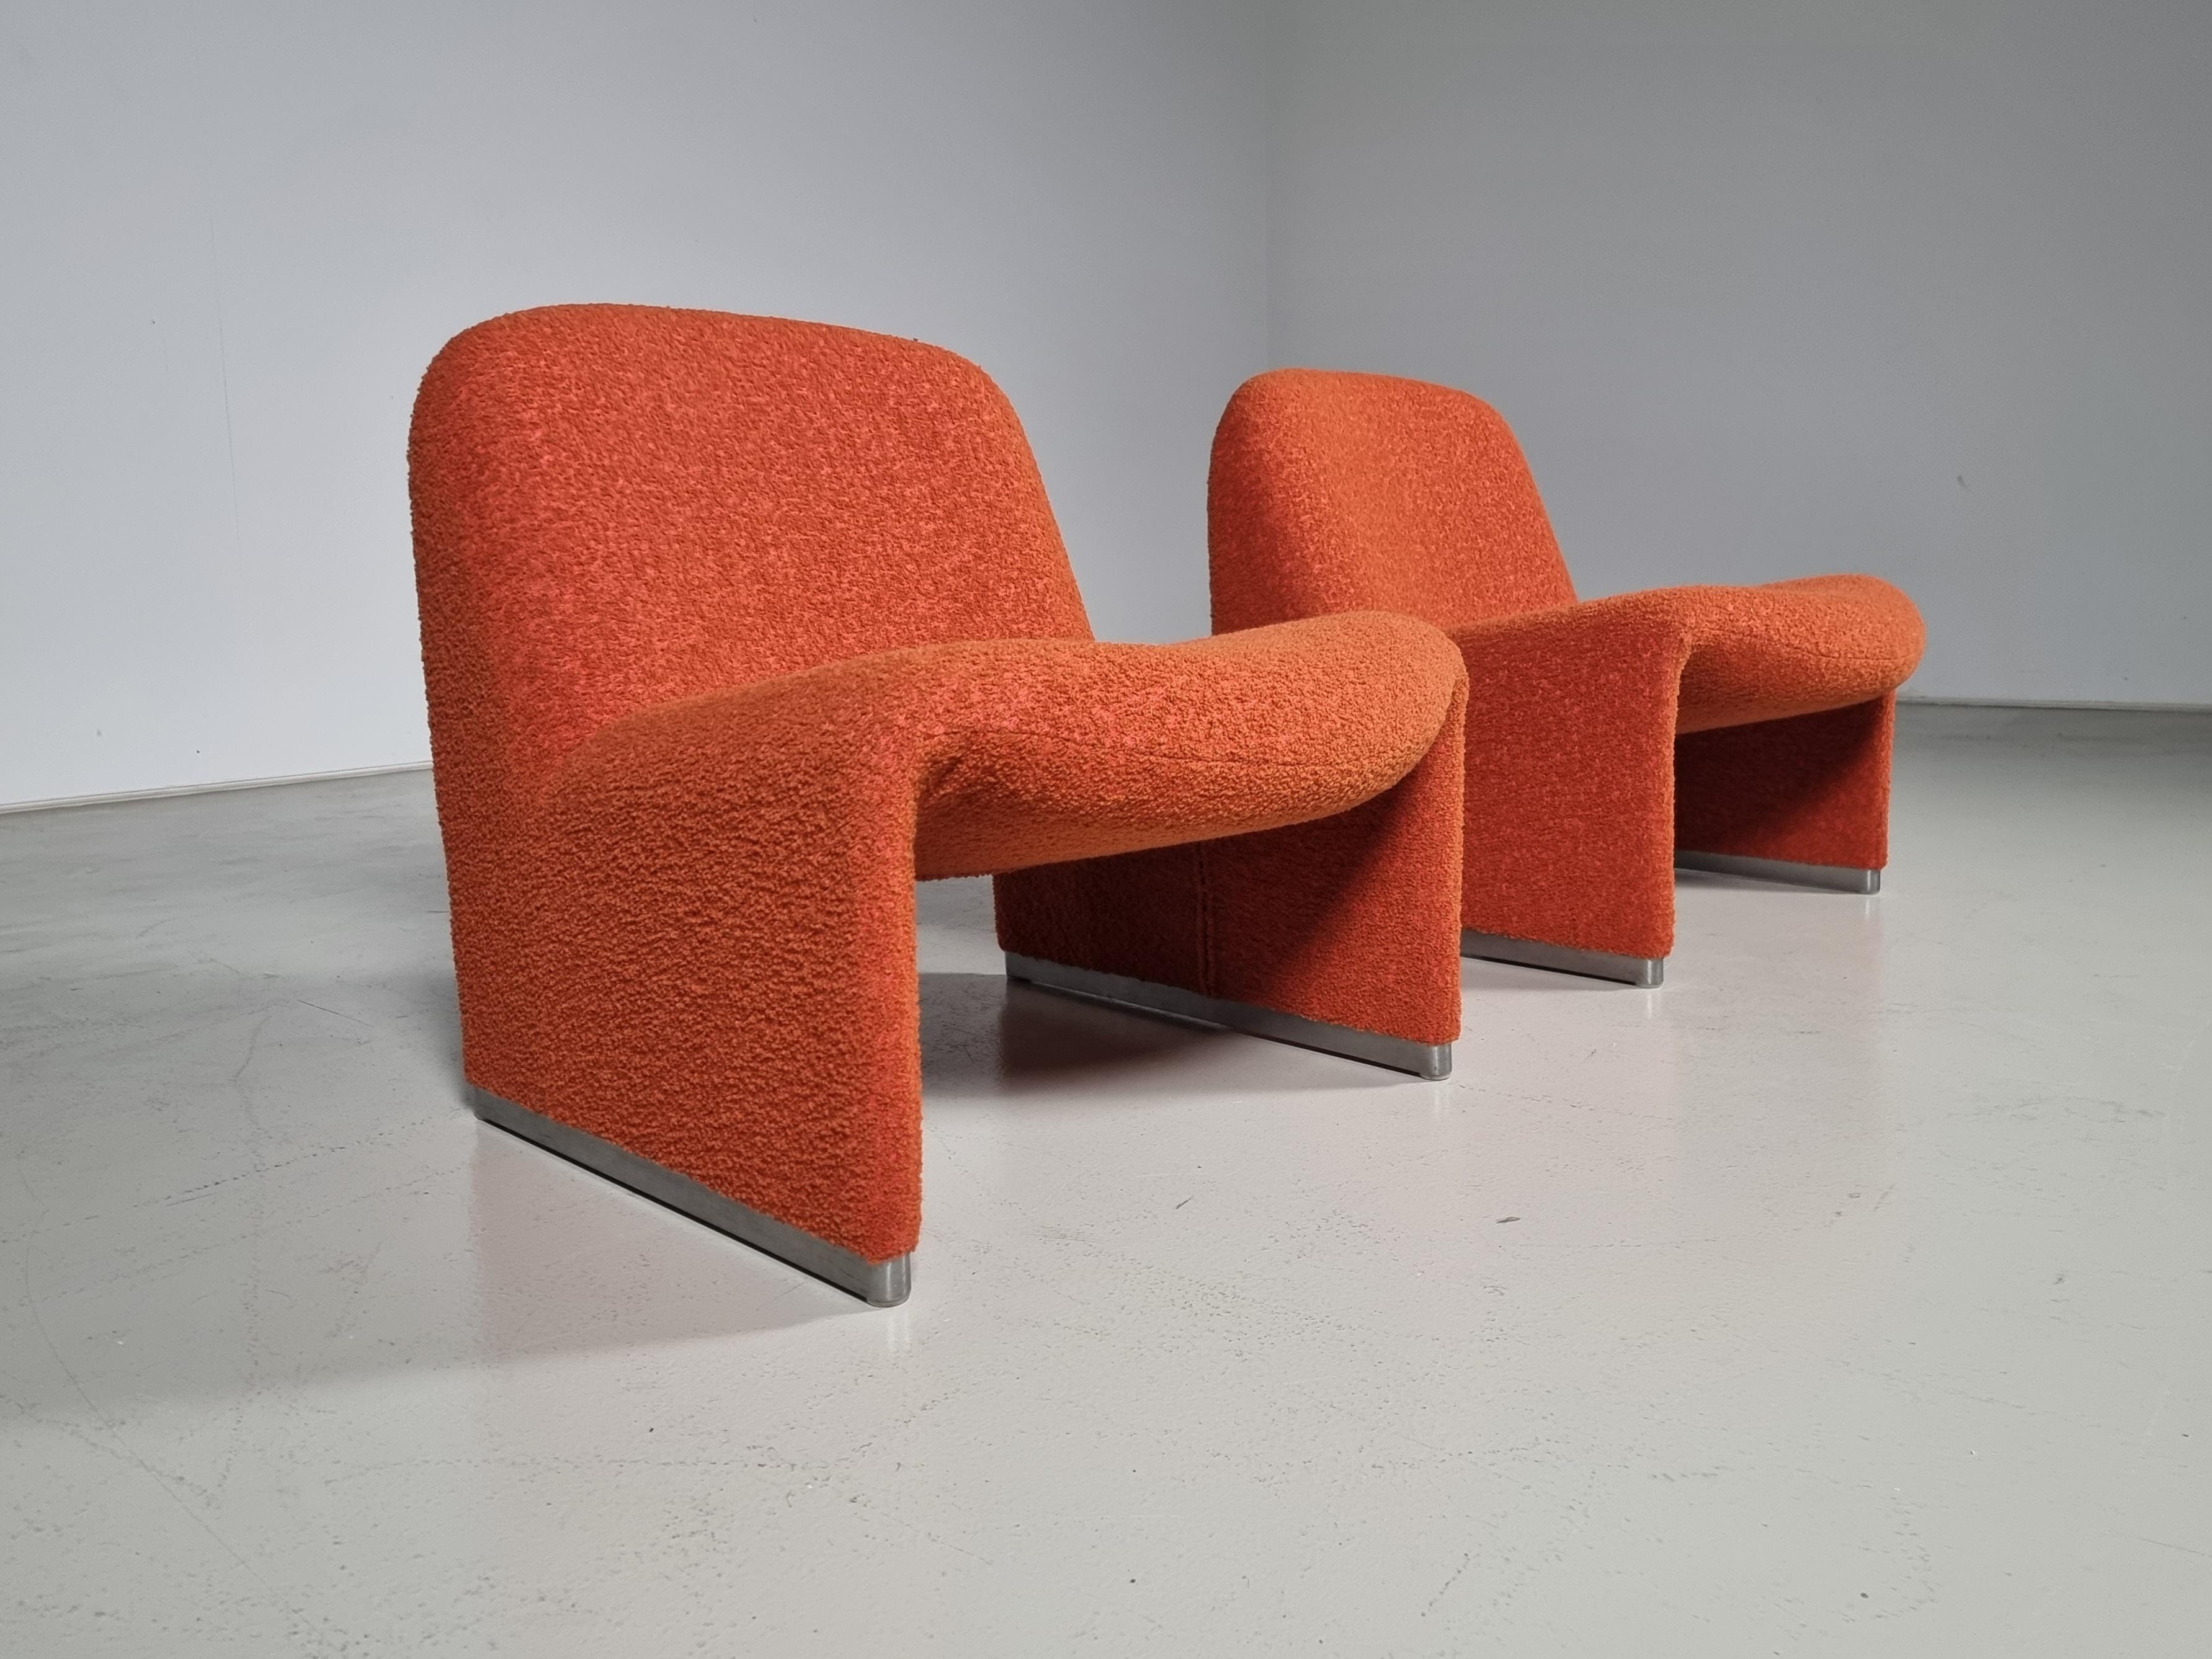 Giancarlo Piretti designed lounge “Alky” chairs newly upholstered in a high-end rusty red/orange cotton/wool Bouclé. Aluminum frame and polished chrome footrests. Beautiful organic curves are reminiscent of Pierre Paulin's designs. Produced by